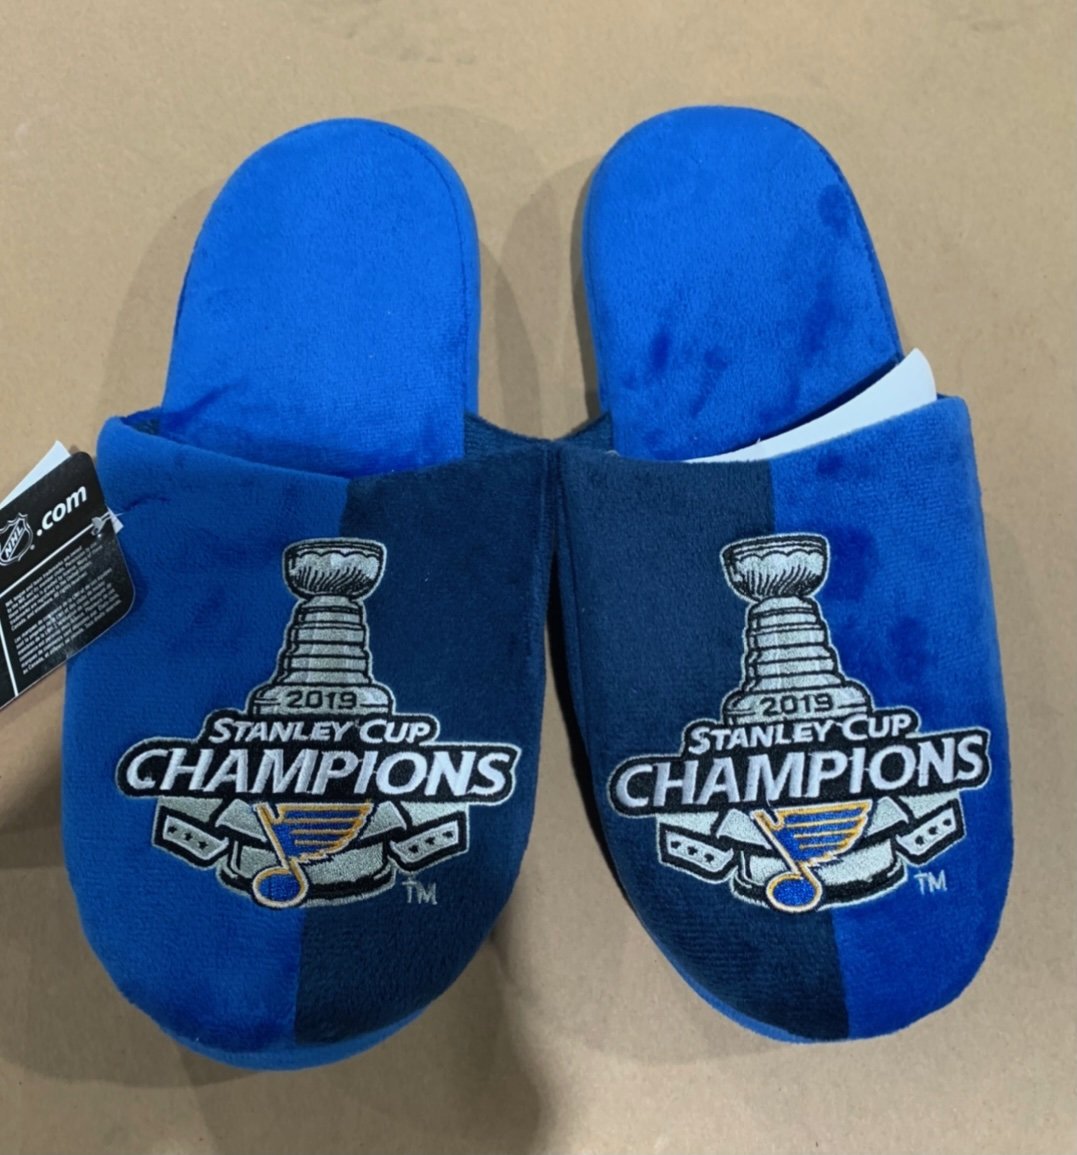 St. Louis Blues Slippers, Blues Slide Slippers, Moccasins